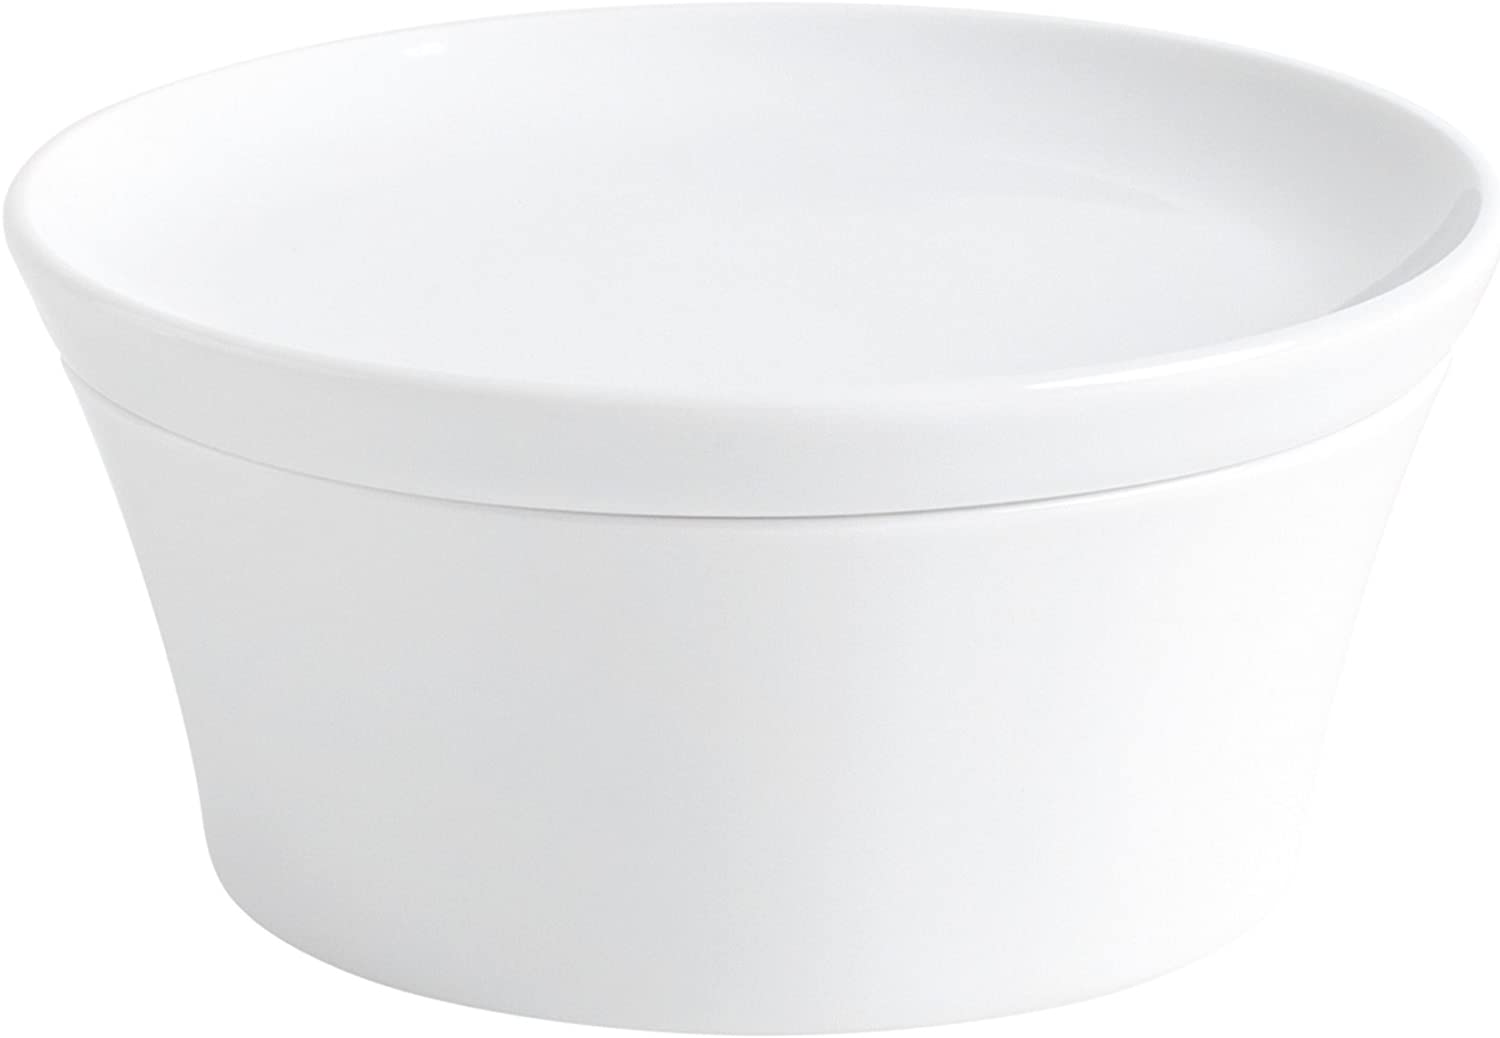 KAHLA Magic Grip Kitchen Creme Brulee Souffle Dishes with Lid, Standard Pie Dish, Pots, Ragoutfin Silicone Coating, Non Slip, 14 cm, White, 32B195 A90032 °C MG1